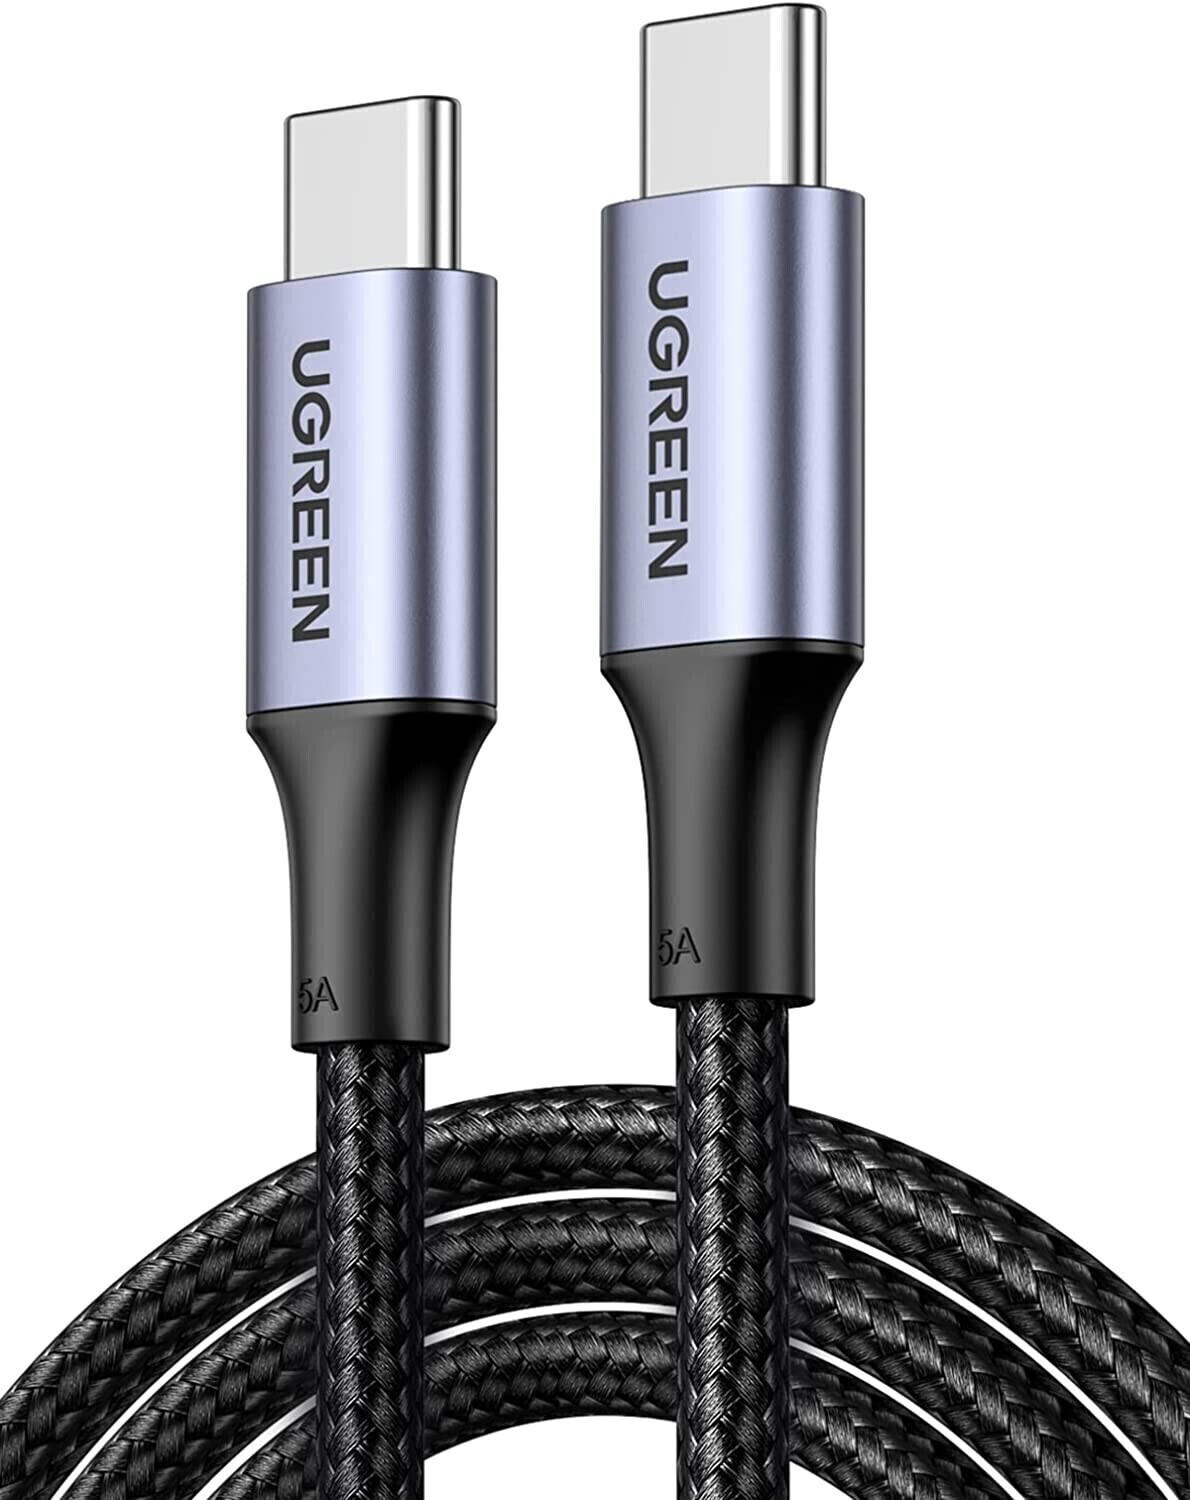 Ugreen 100W USB-C Cable 3m